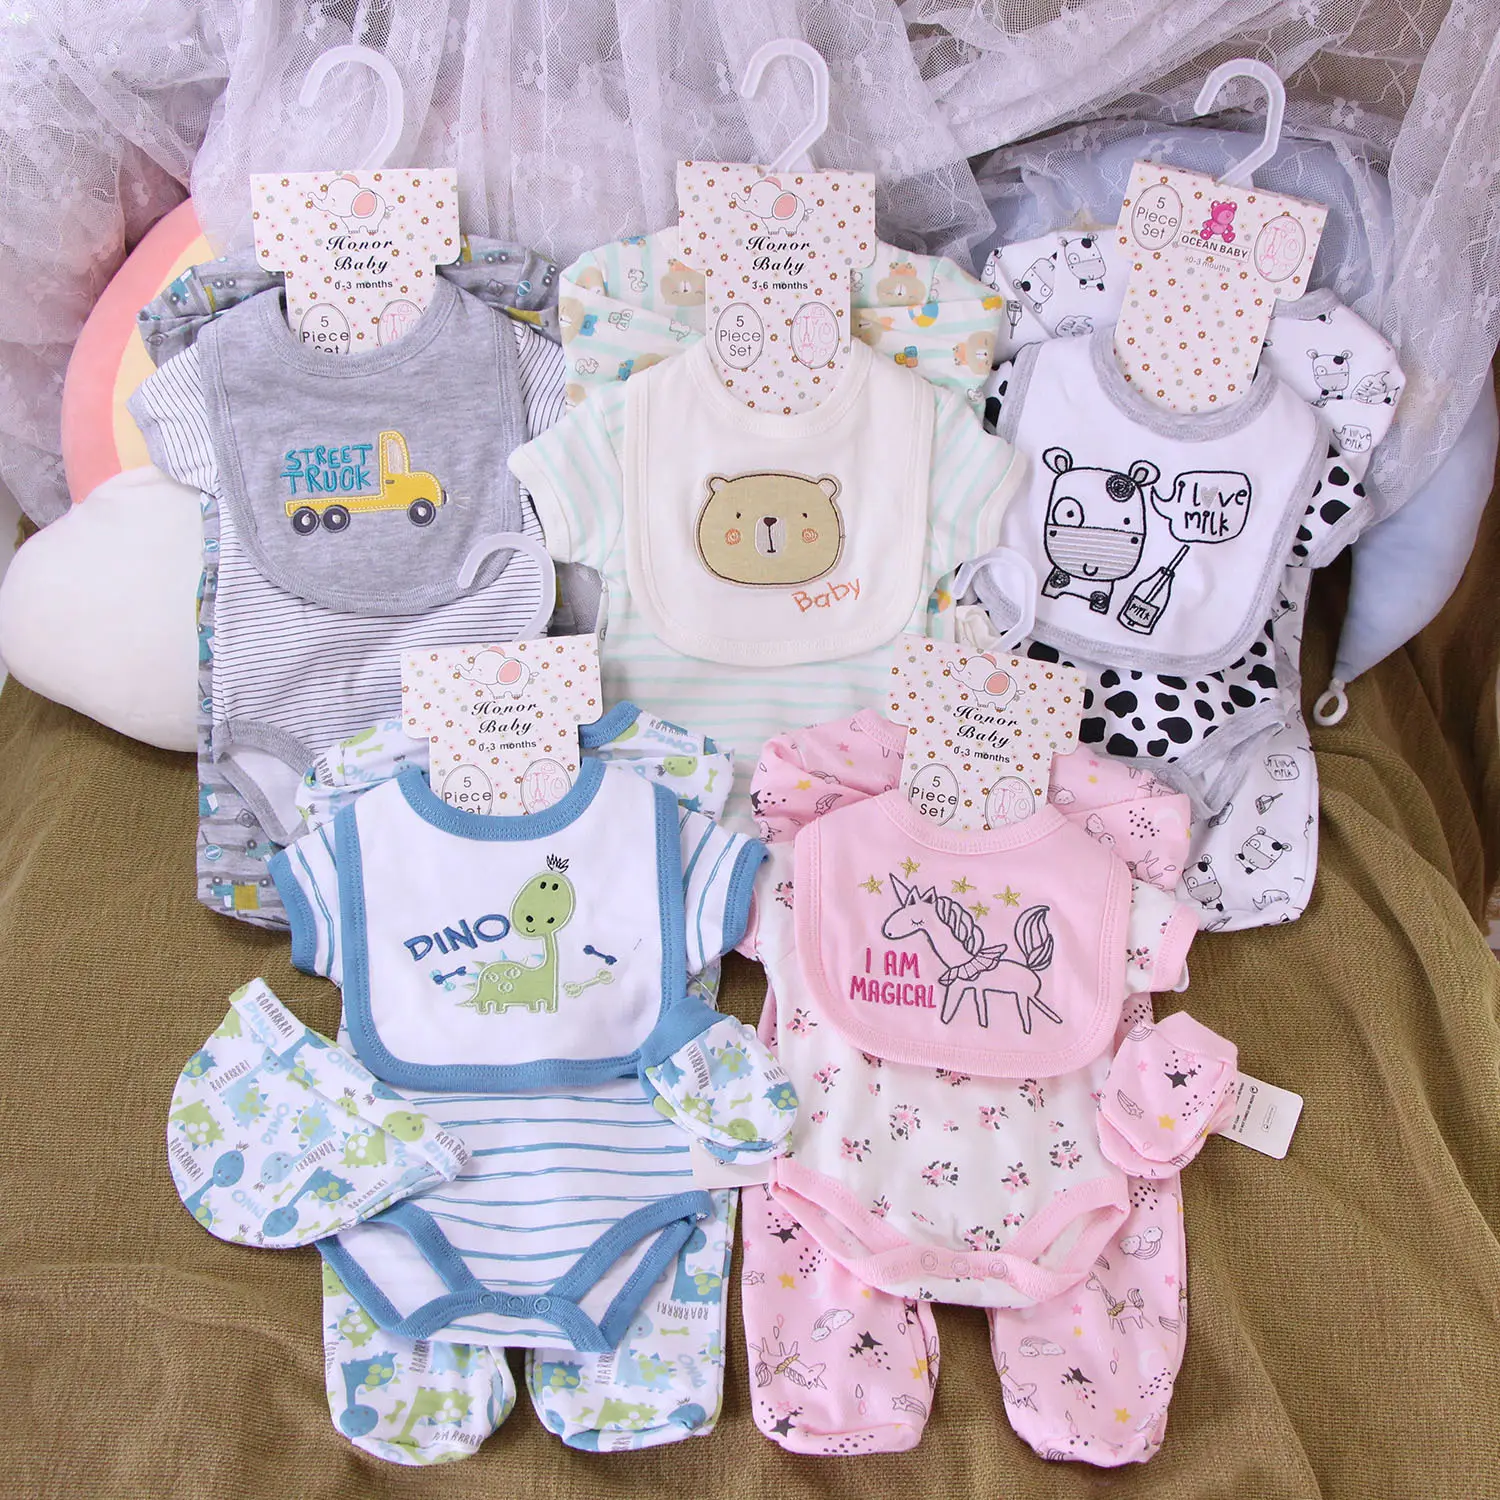 Wholesale Newborn Baby Cloth Infant 100 % Cotton Knitted Romper Jumpsuit Clothes 5pc Set Child Clothes From 0 Months Nicaragua